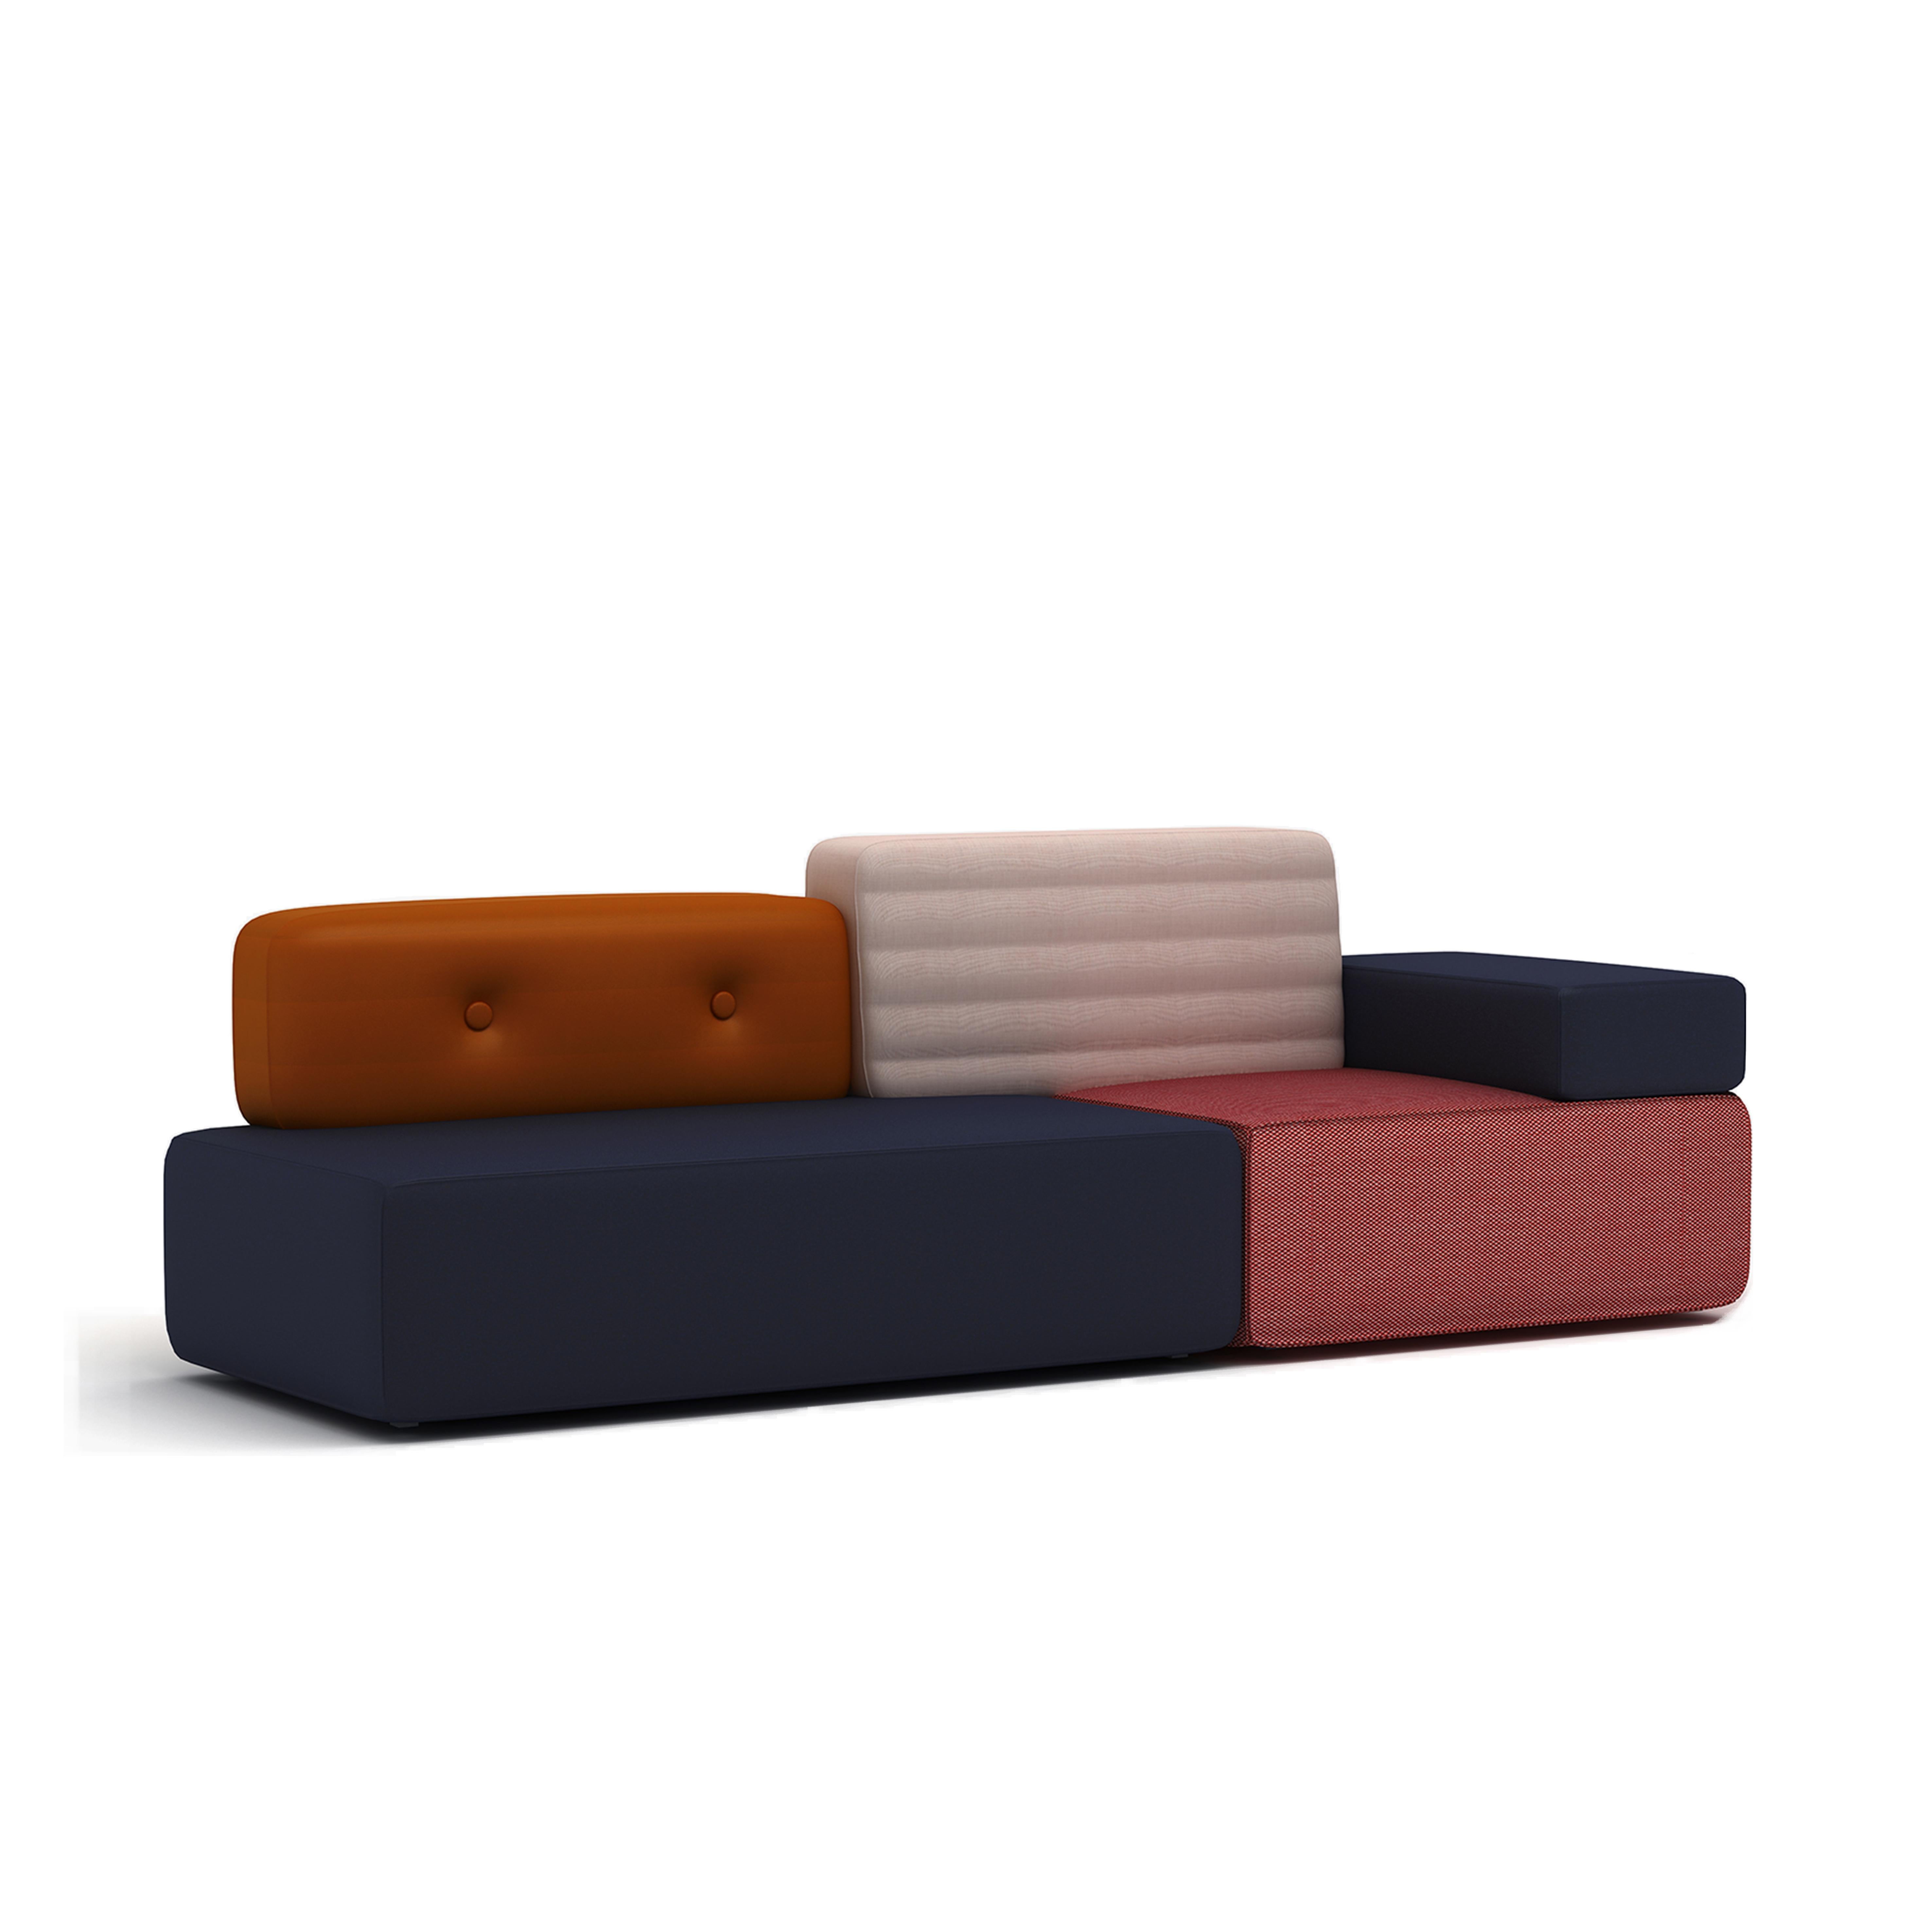 The combo sofa is made with multiple classes of fabrics and leather. There are 3 groups of fabrics available with different pricing, samples available upon request.

Group A: 
material: imported wool + imported leather 
color: navy blue+pink / grey